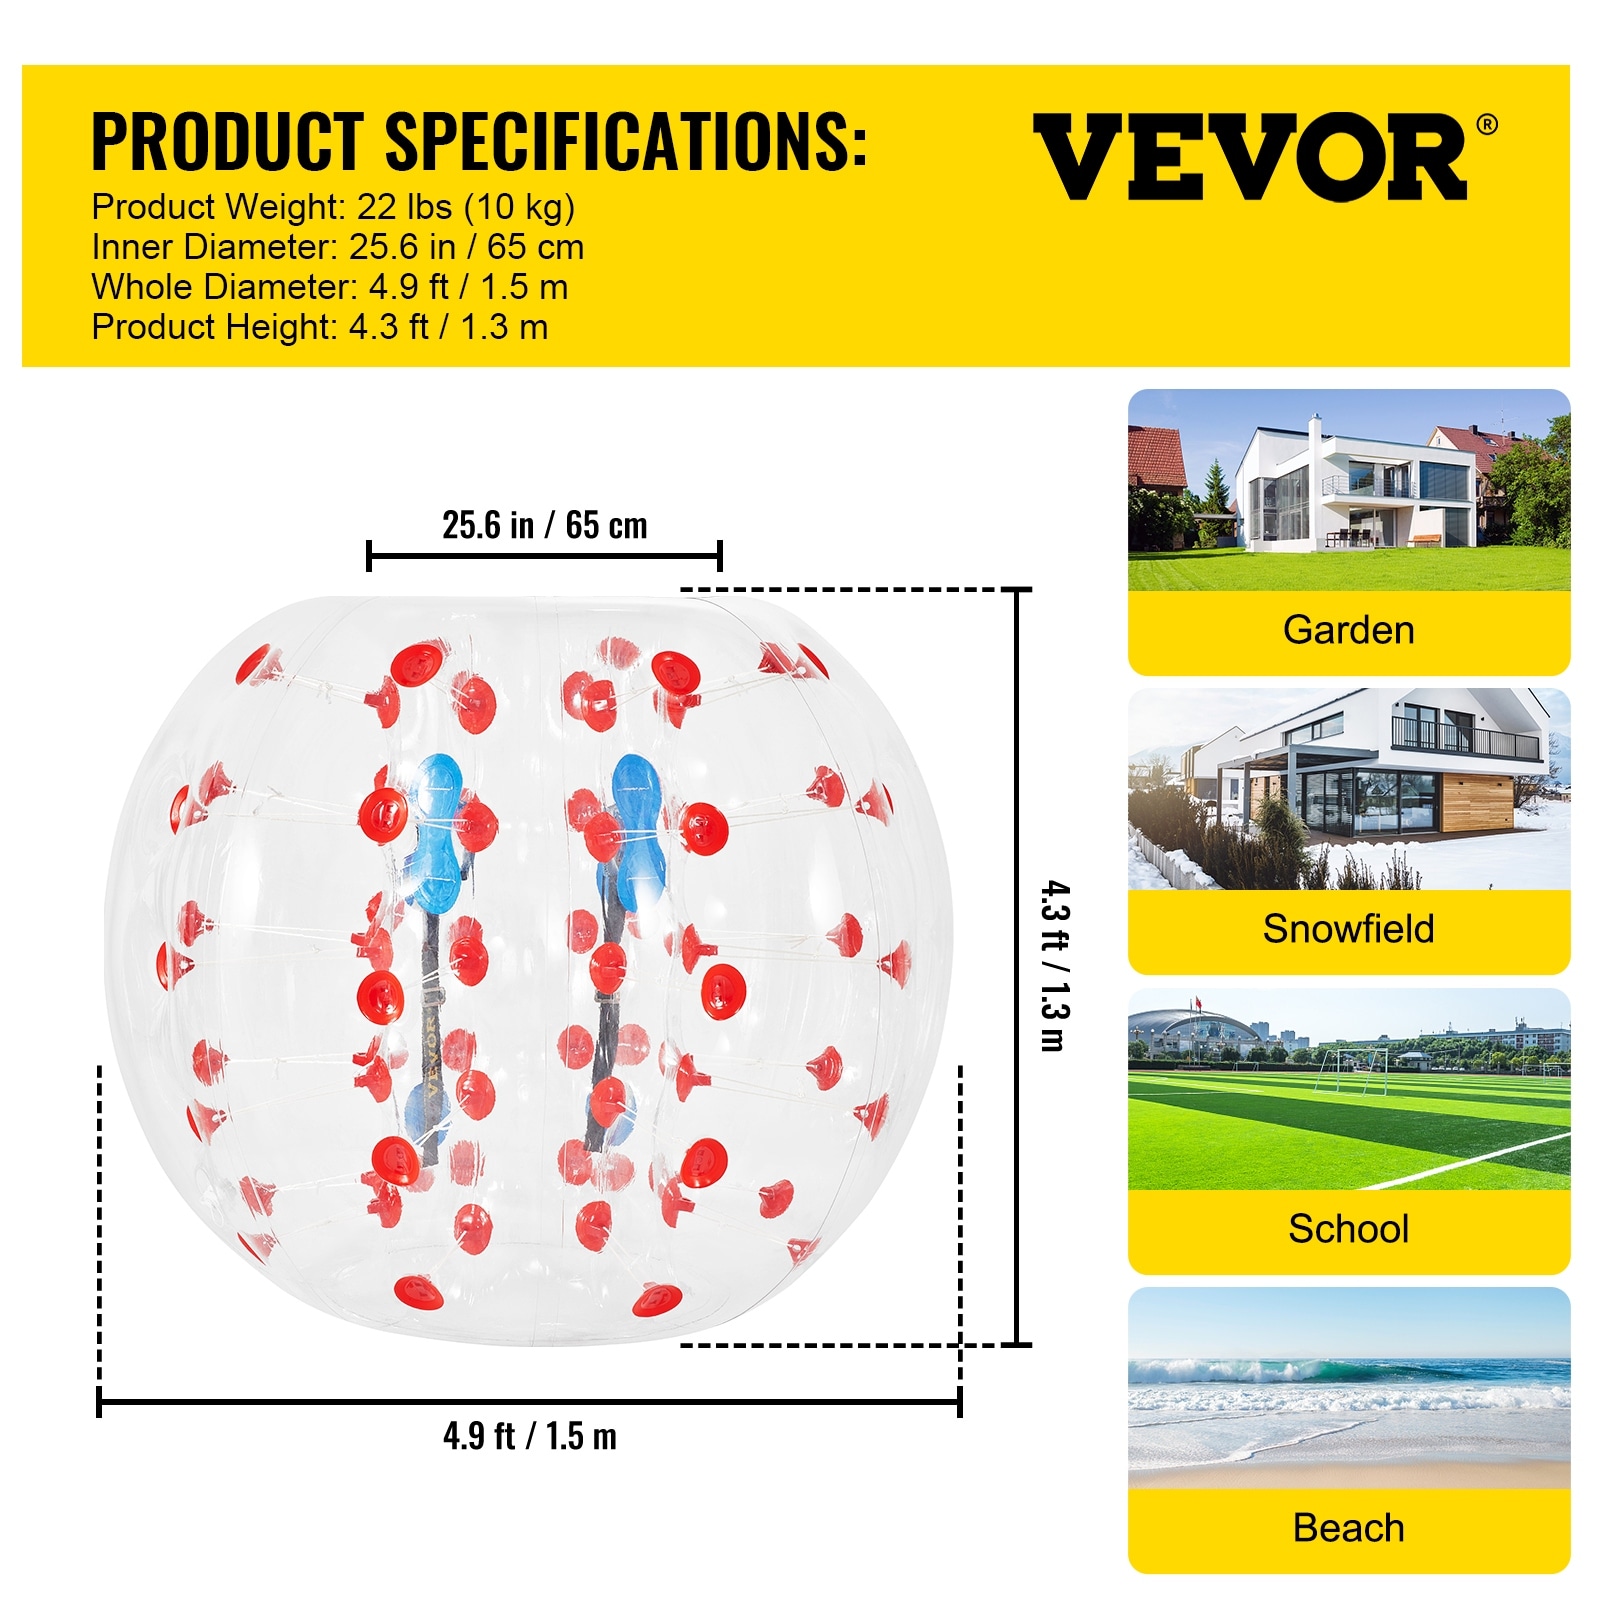 VEVOR Inflatable Bumper Ball Bubble Soccer 5FT for Adult Balls Human and Child Outdoor Inflatable Bumper Ball